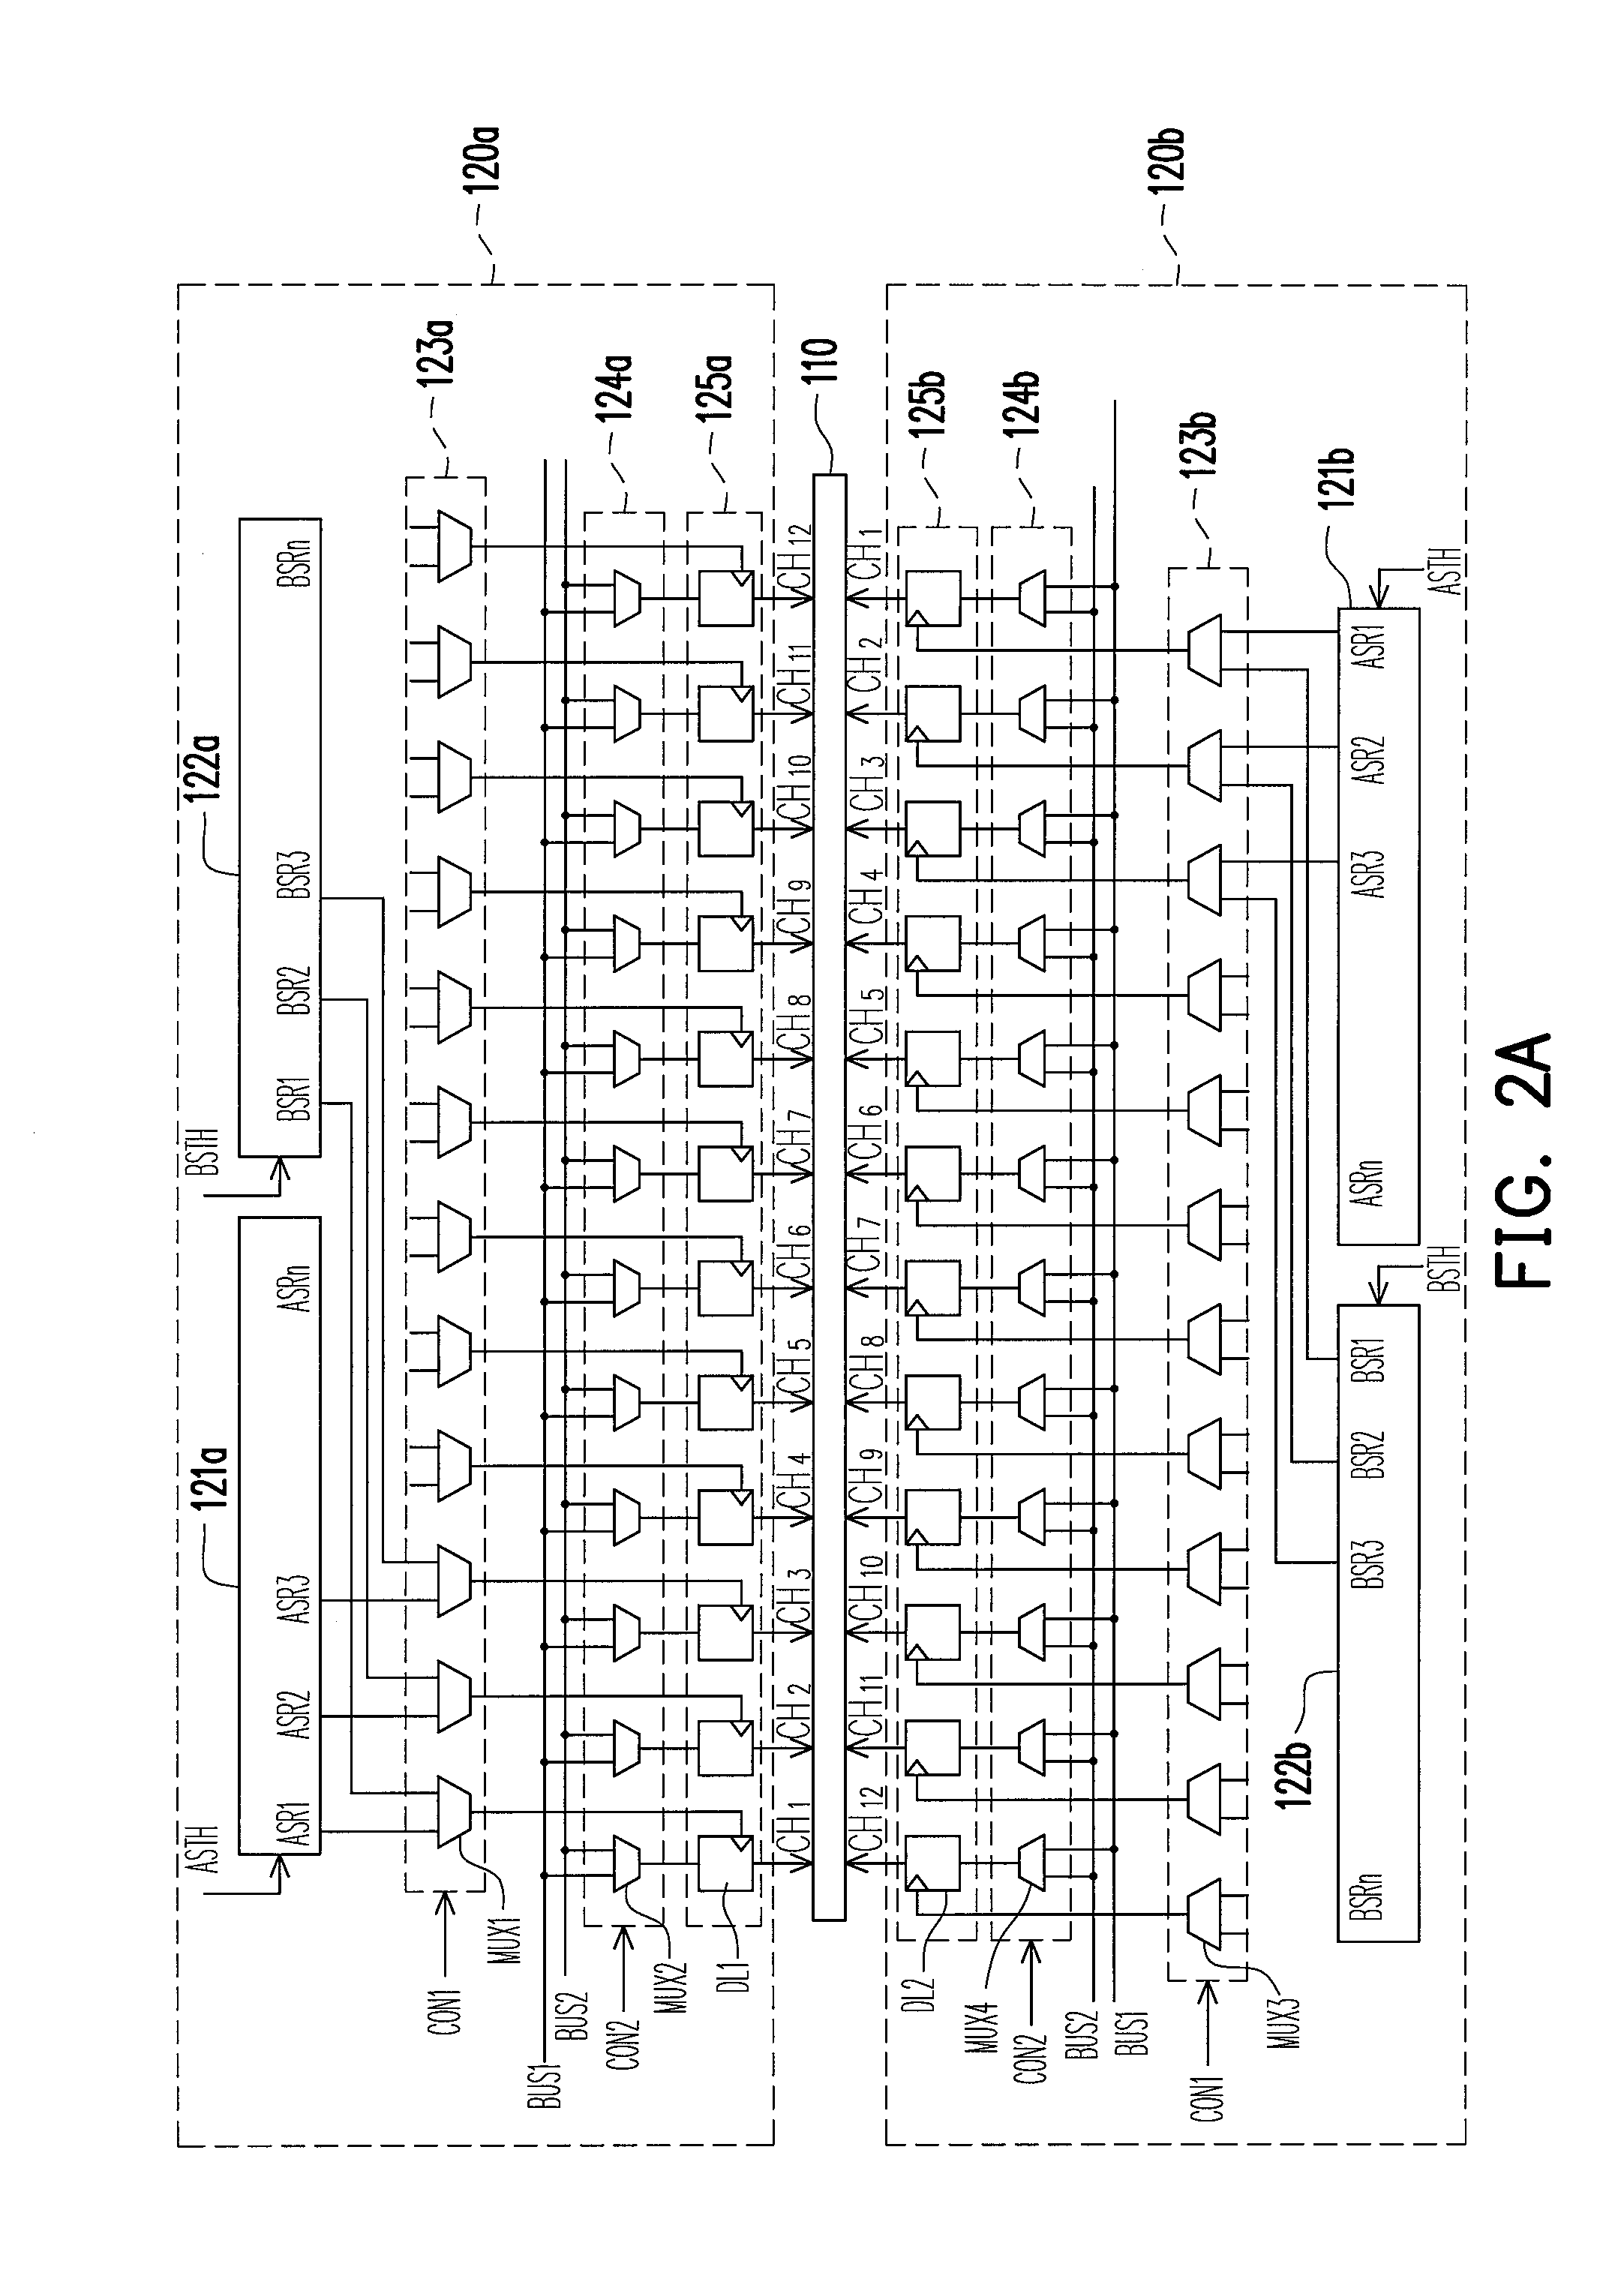 Driver circuit of display device